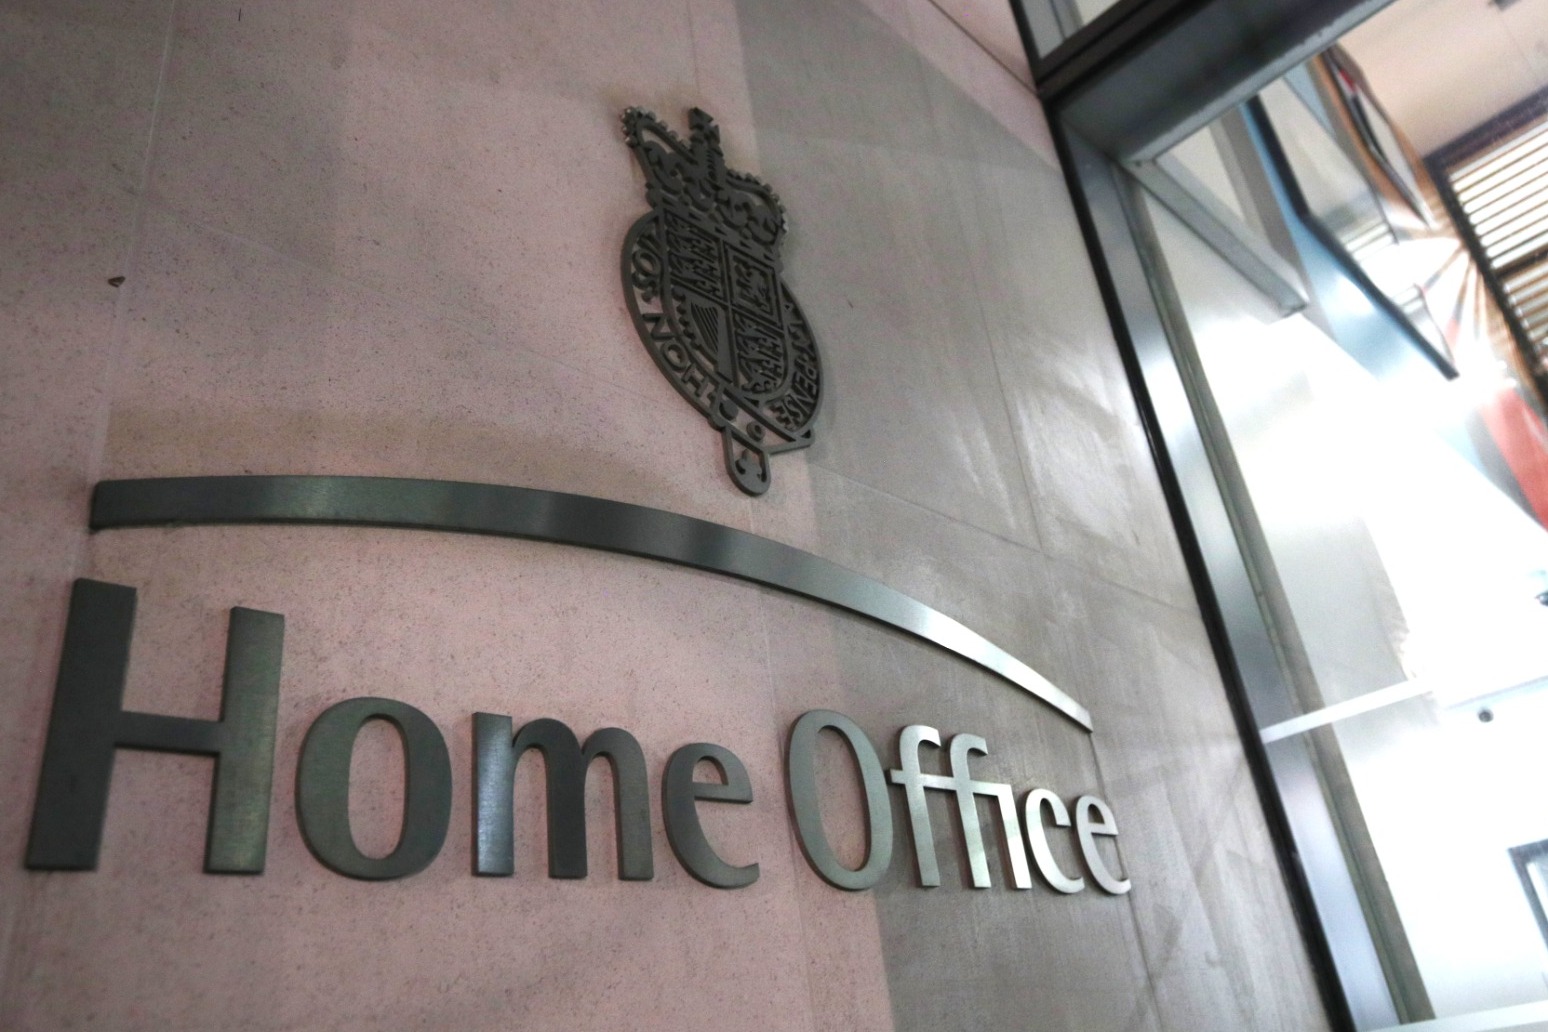 Migrant hotels bill climbs to £8m a day, according to Home Office accounts 